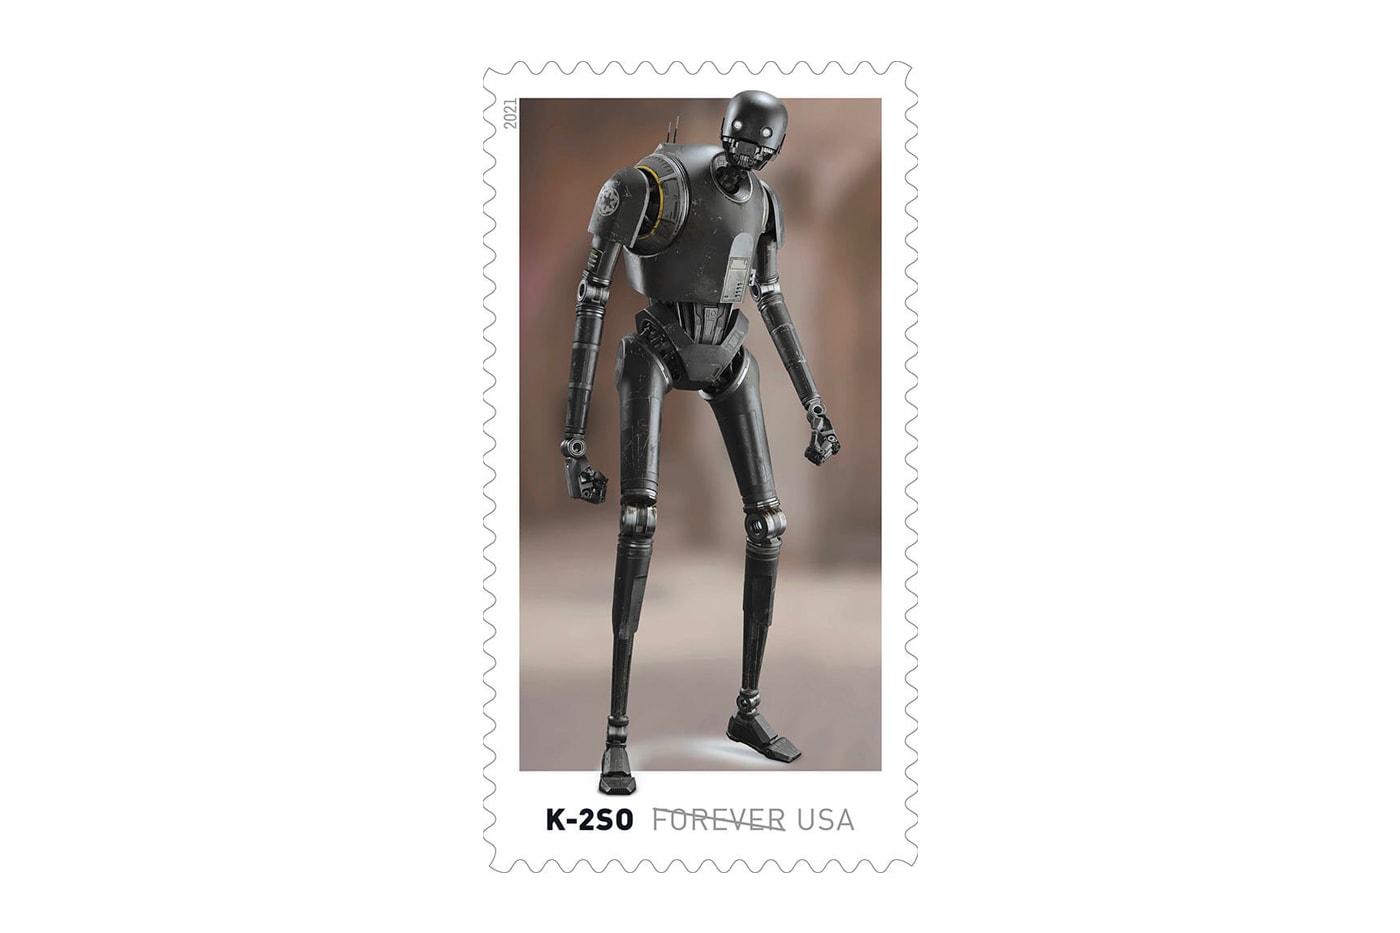 The United States Postal Service Is Releasing Commemorative 'Star Wars' Stamps  Droids Mails collectibles Lucasfilms stamps 